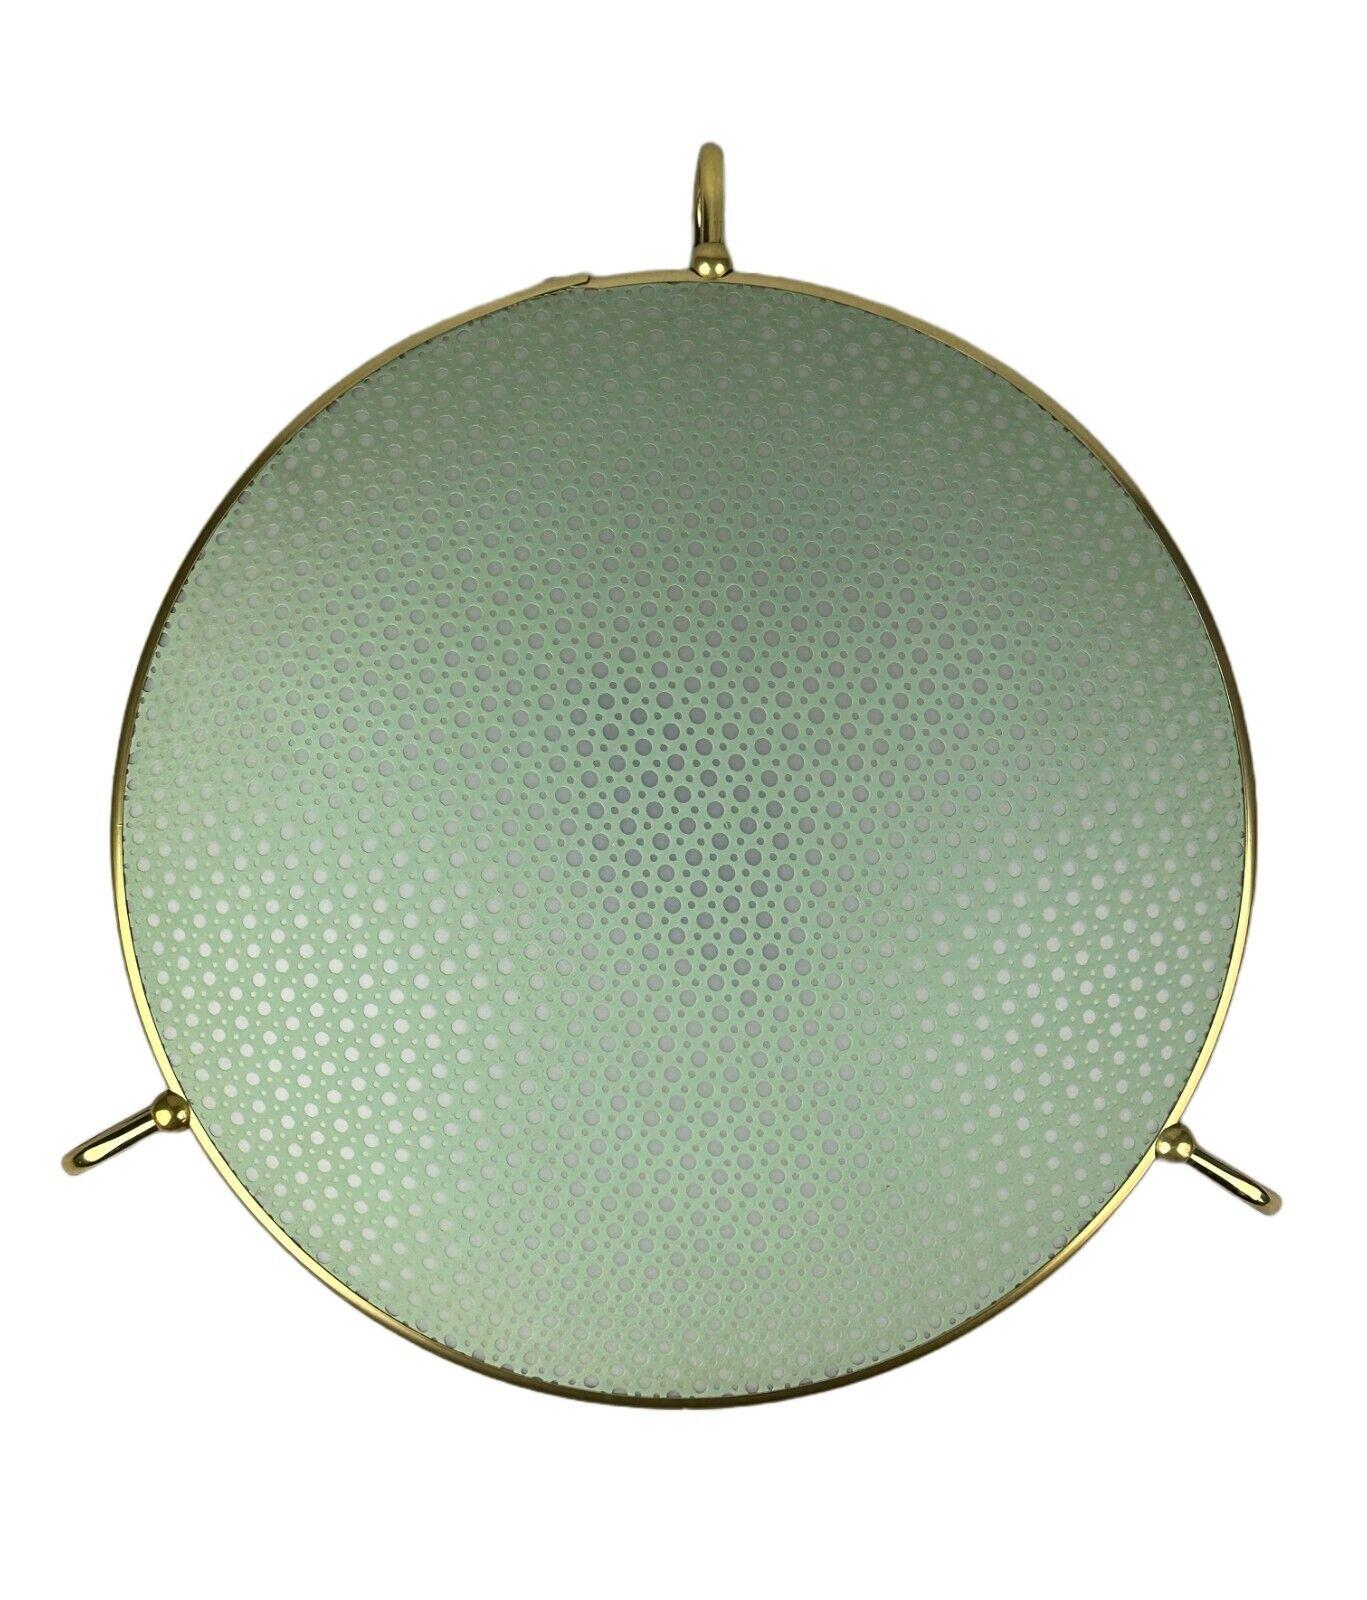 60s 70s ceiling lamp Plafoniere Erco Leuchten Germany Space Age Design

Object: ceiling lamp

Manufacturer: Erco lights

Condition: good

Age: around 1960-1970

Dimensions:

Diameter = 51cm
Height = 13cm

Material: plastic, metal, brass

Other